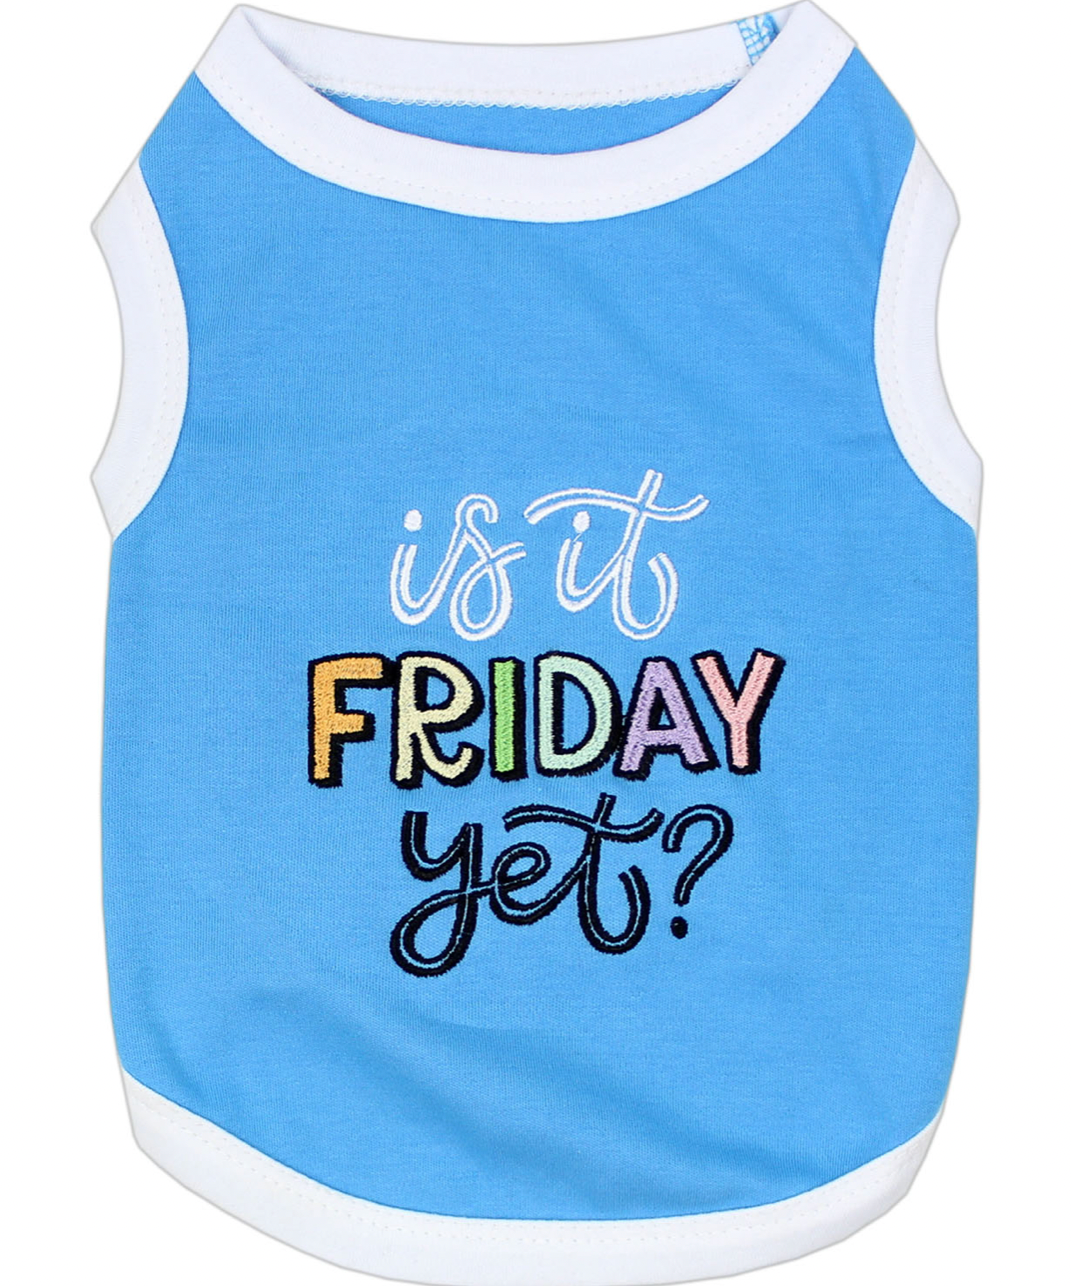 Is it Friday yet? Dog T-Shirt